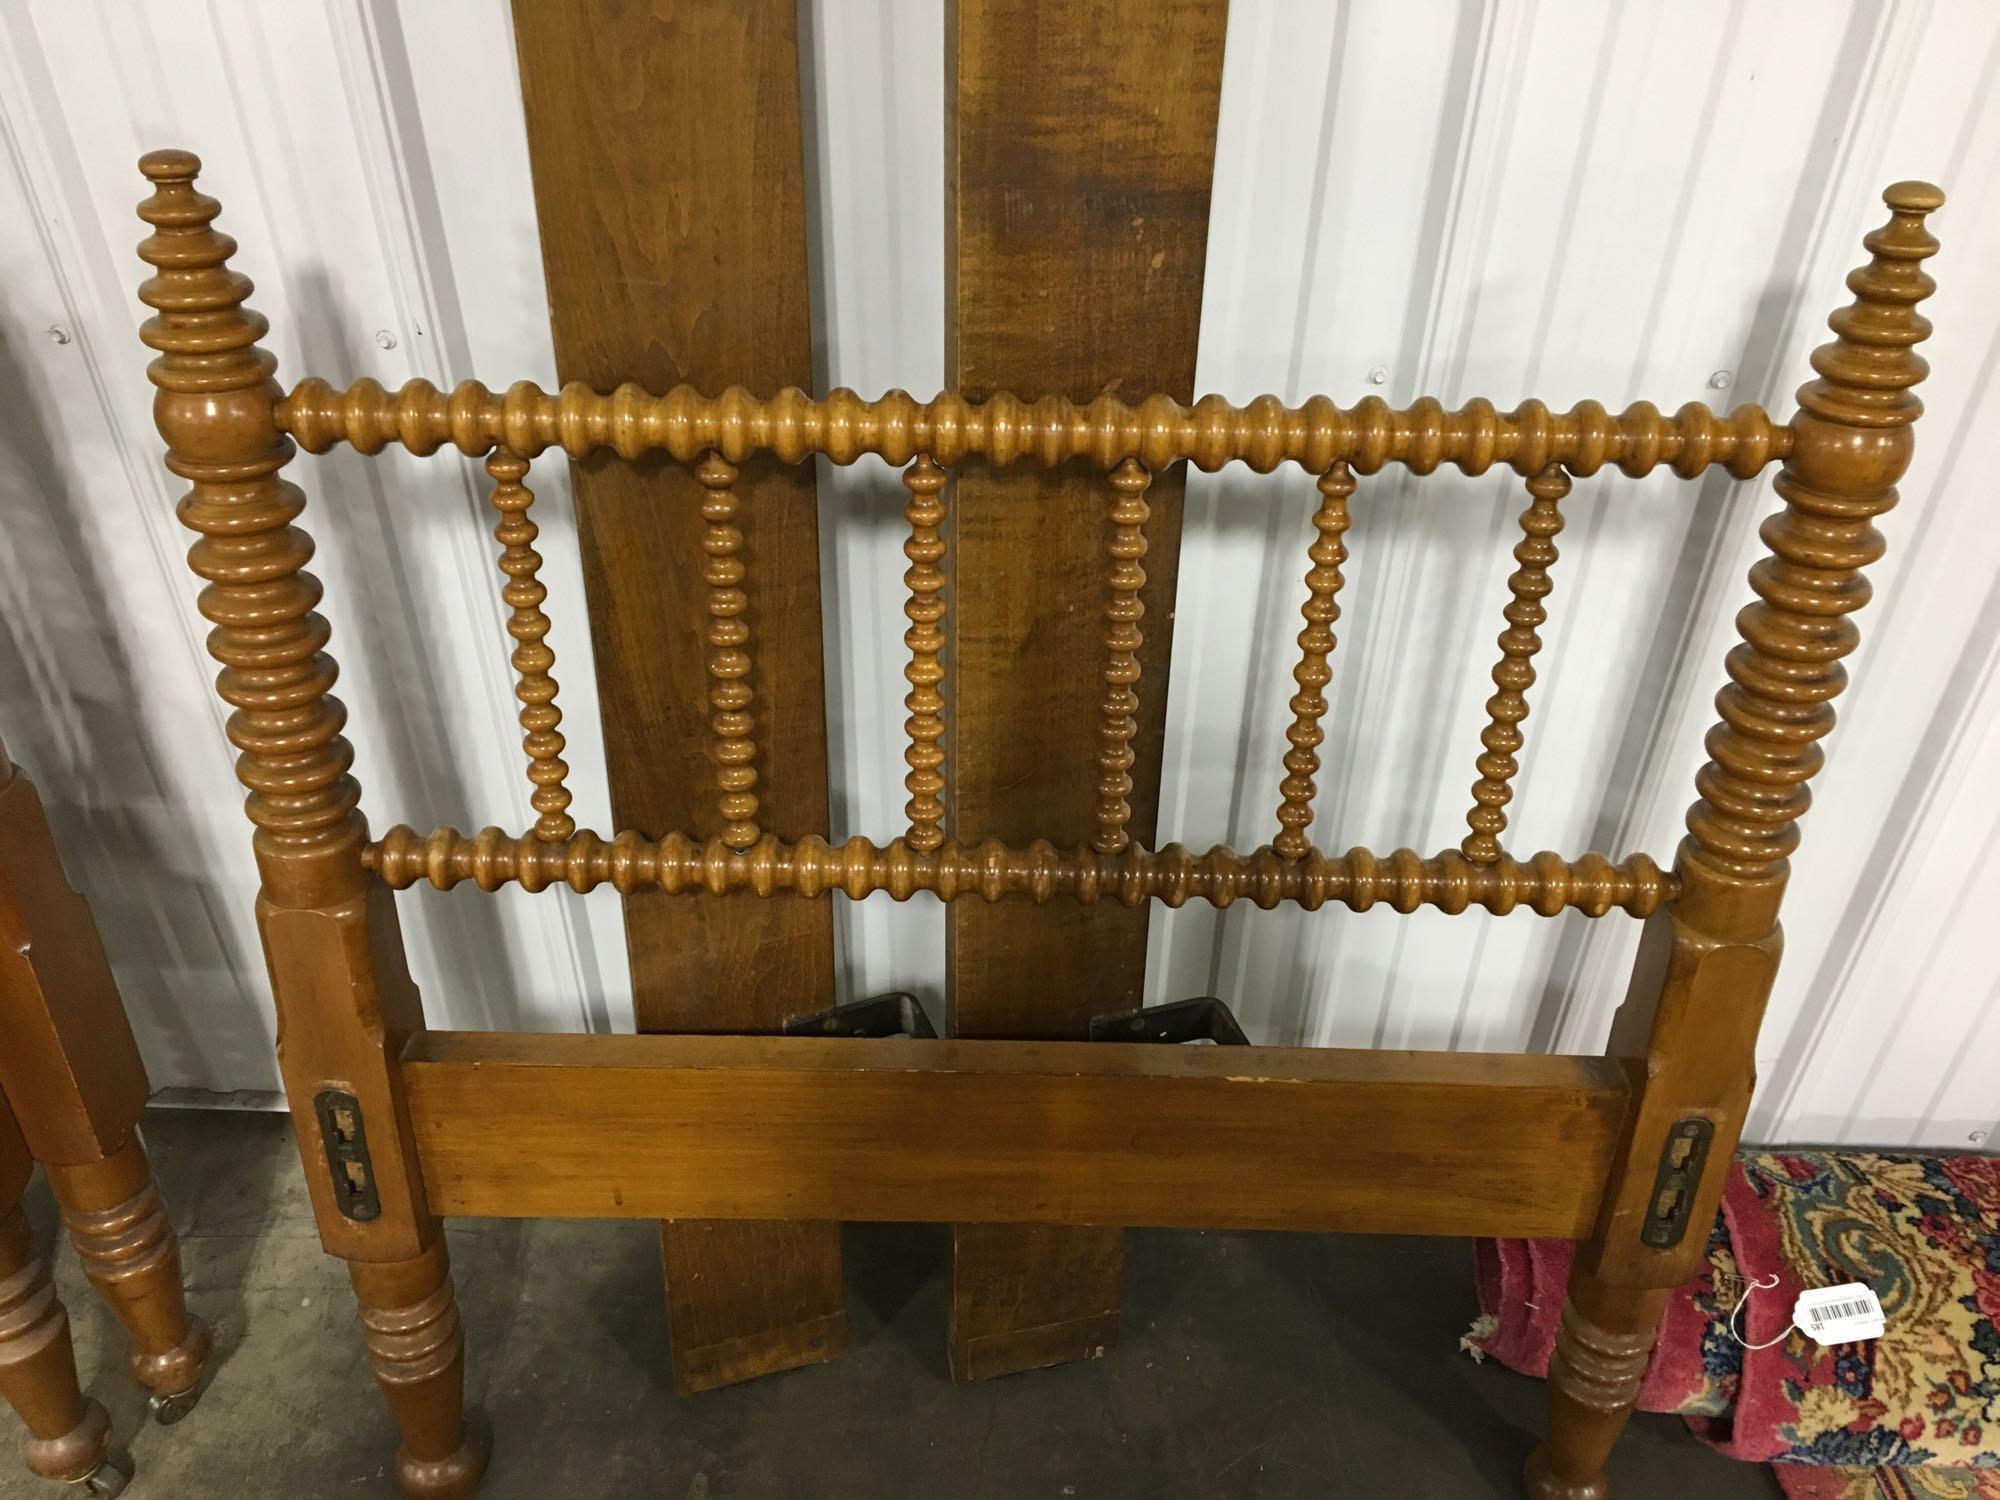 Vintage spindle twin size bed frame (lots 186, 187, 202 match)